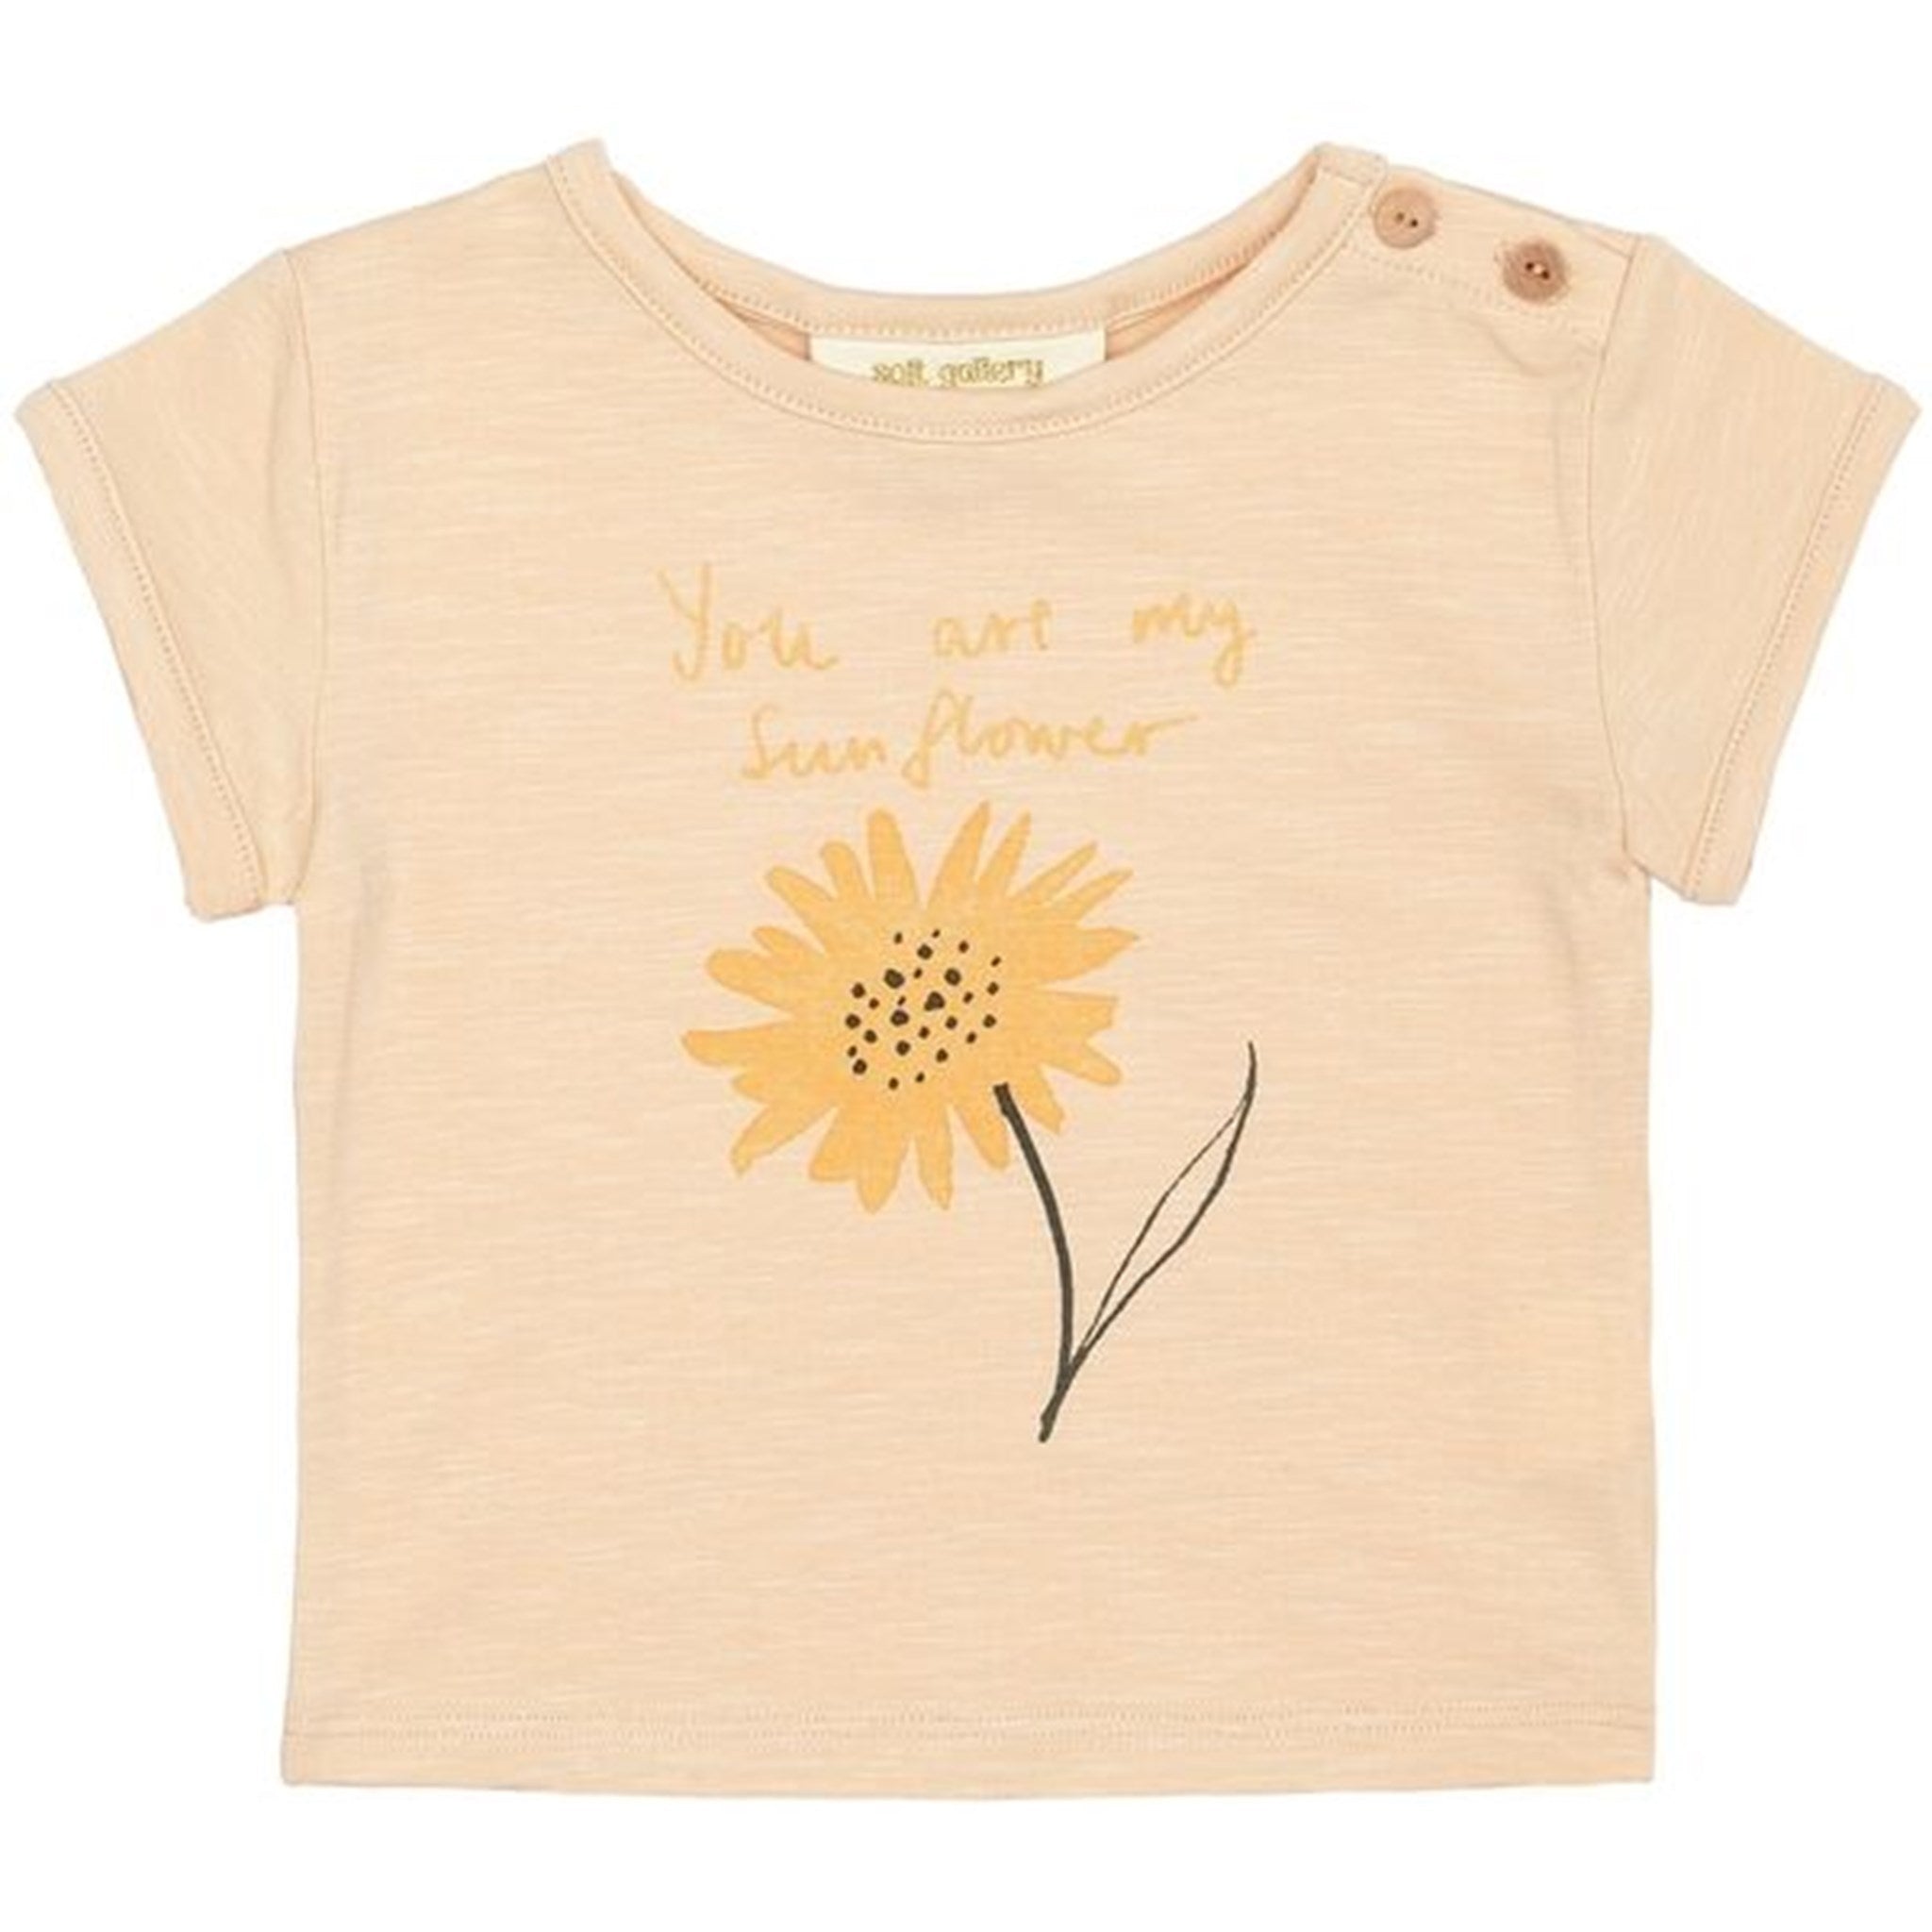 Soft Gallery Winter Wheat Sunny Nelly T-shirt